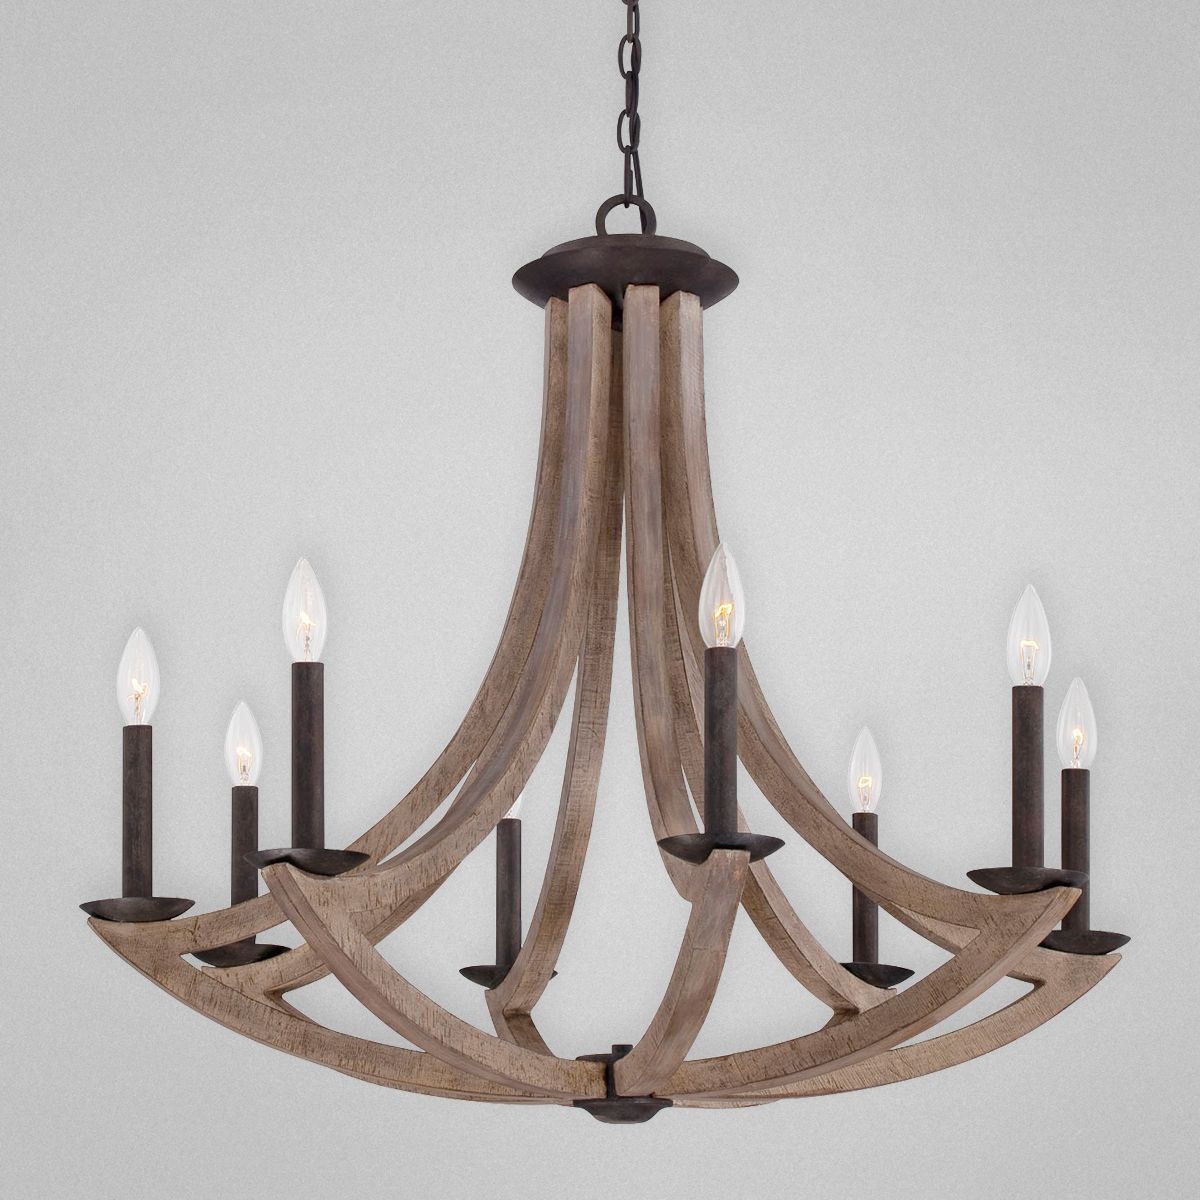 And wood arcata 8 light chandelier is a beautifully designed